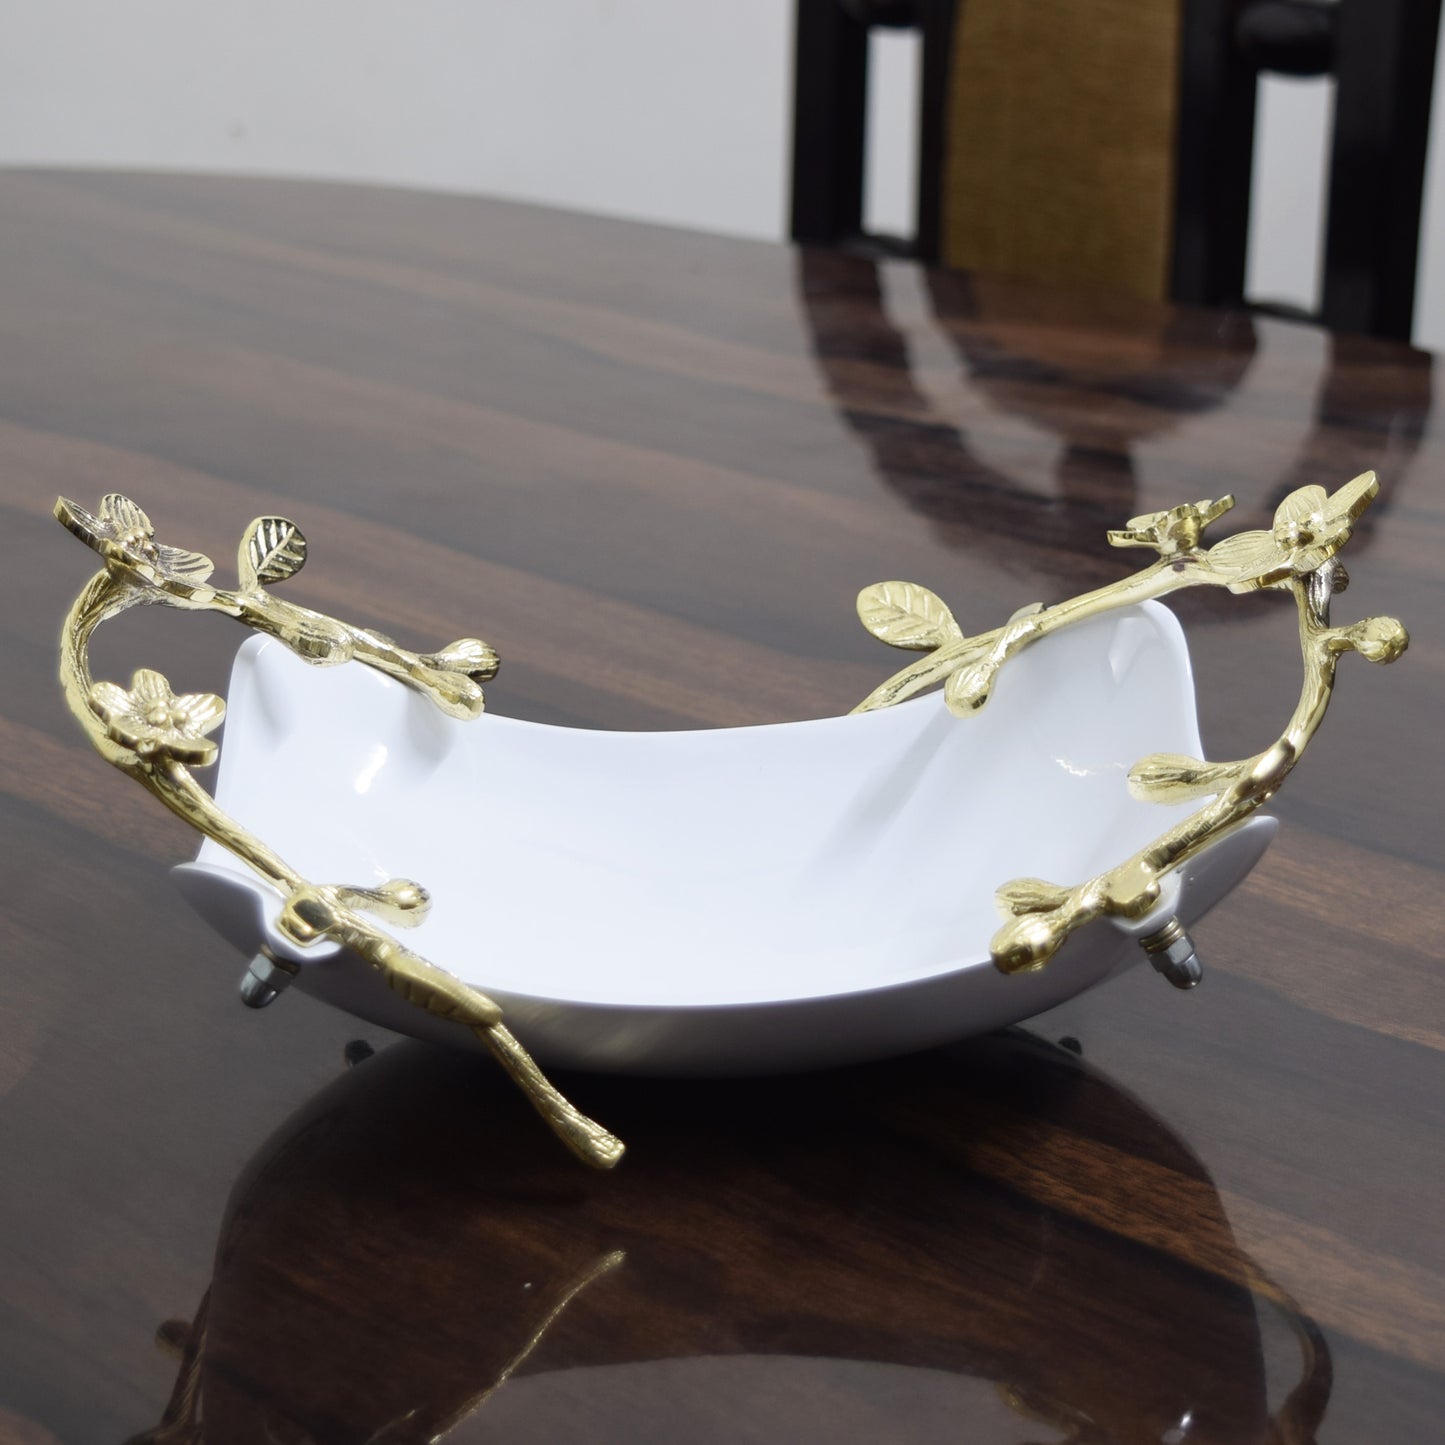 Crinds Pure Metal Luxury Brass Platter Tray for Snacks